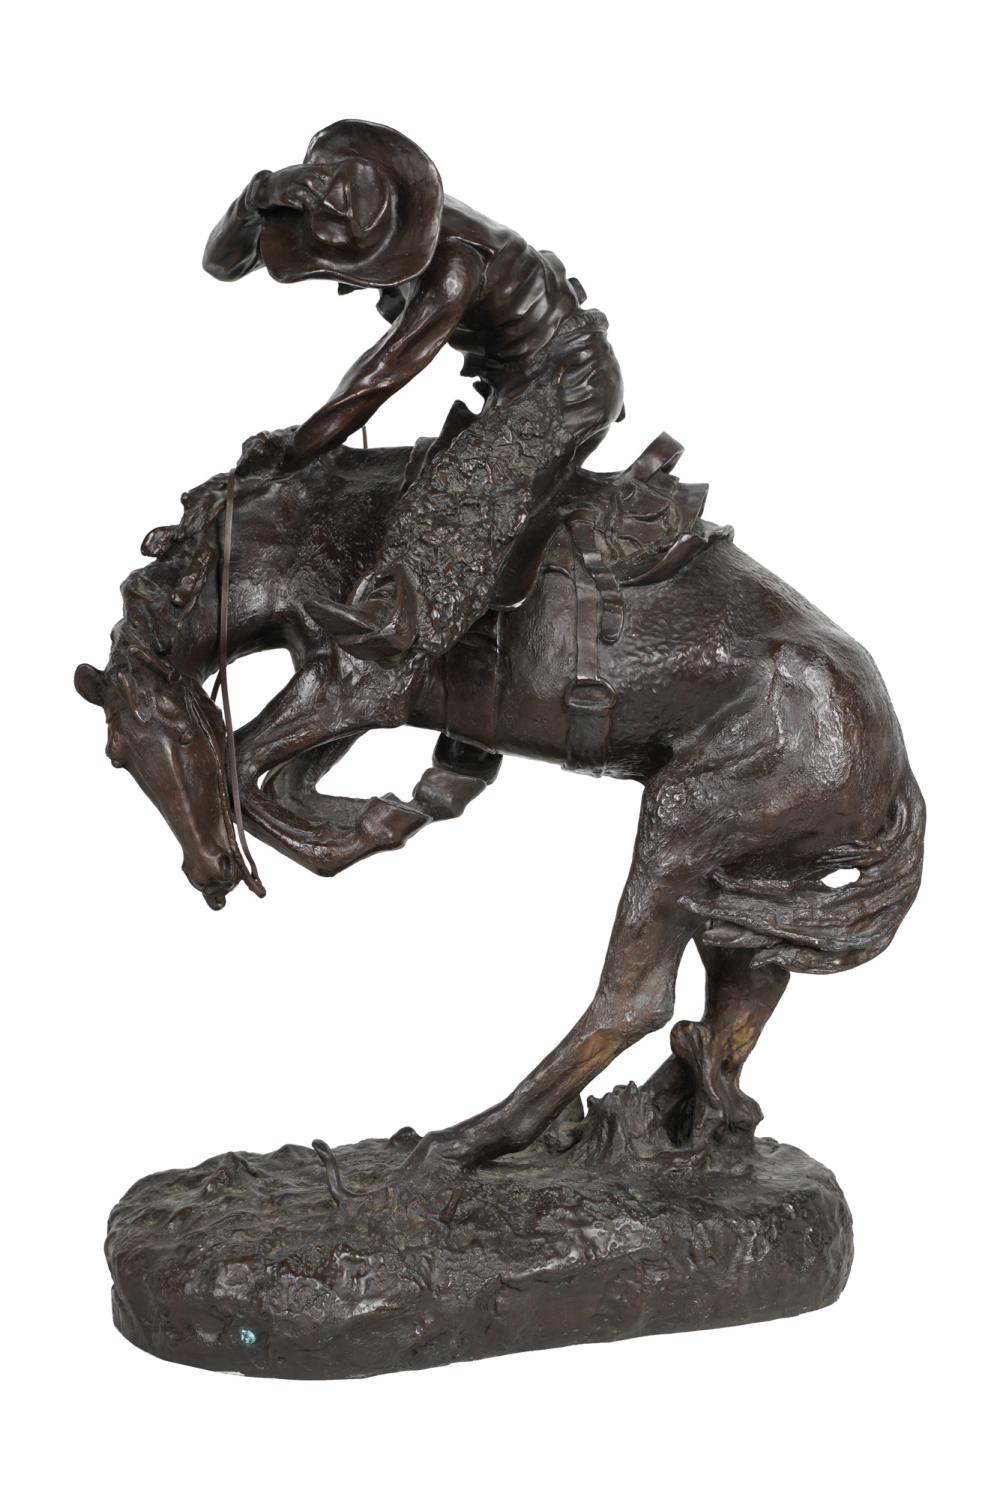 AFTER FREDERIC REMINGTON: "THE